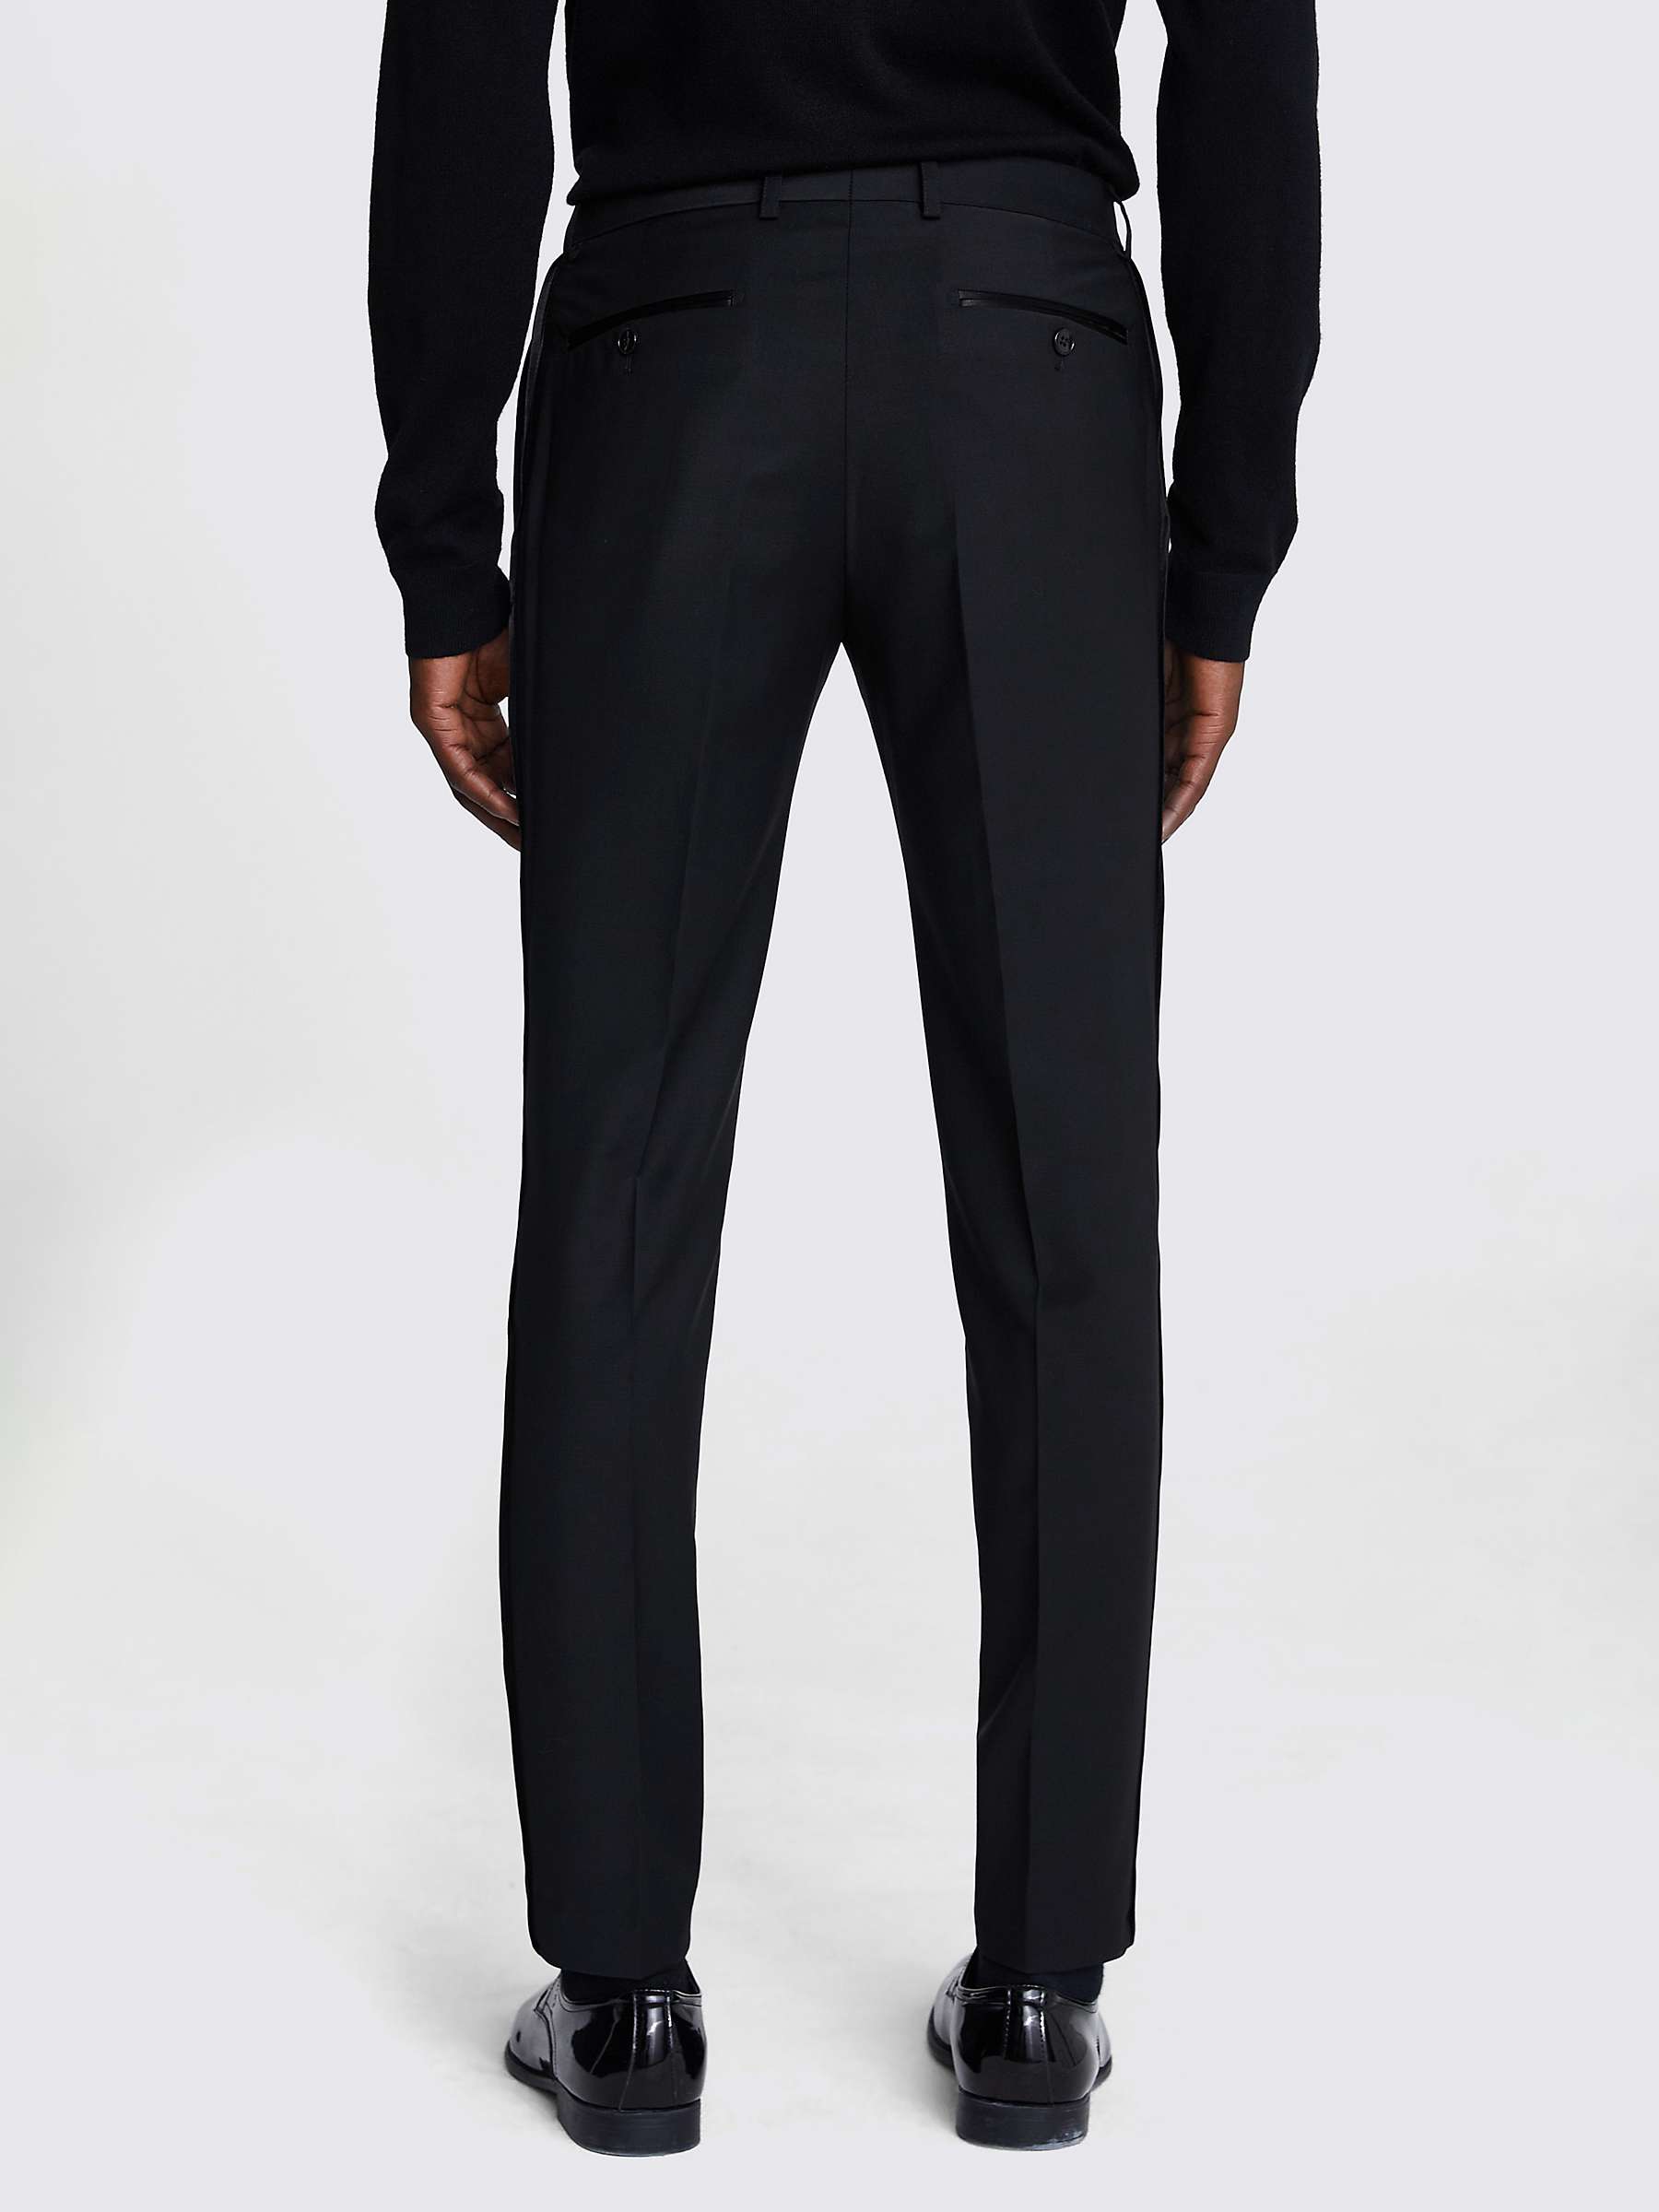 Buy Moss Tailored Wool Blend Dress Trousers, Black Online at johnlewis.com